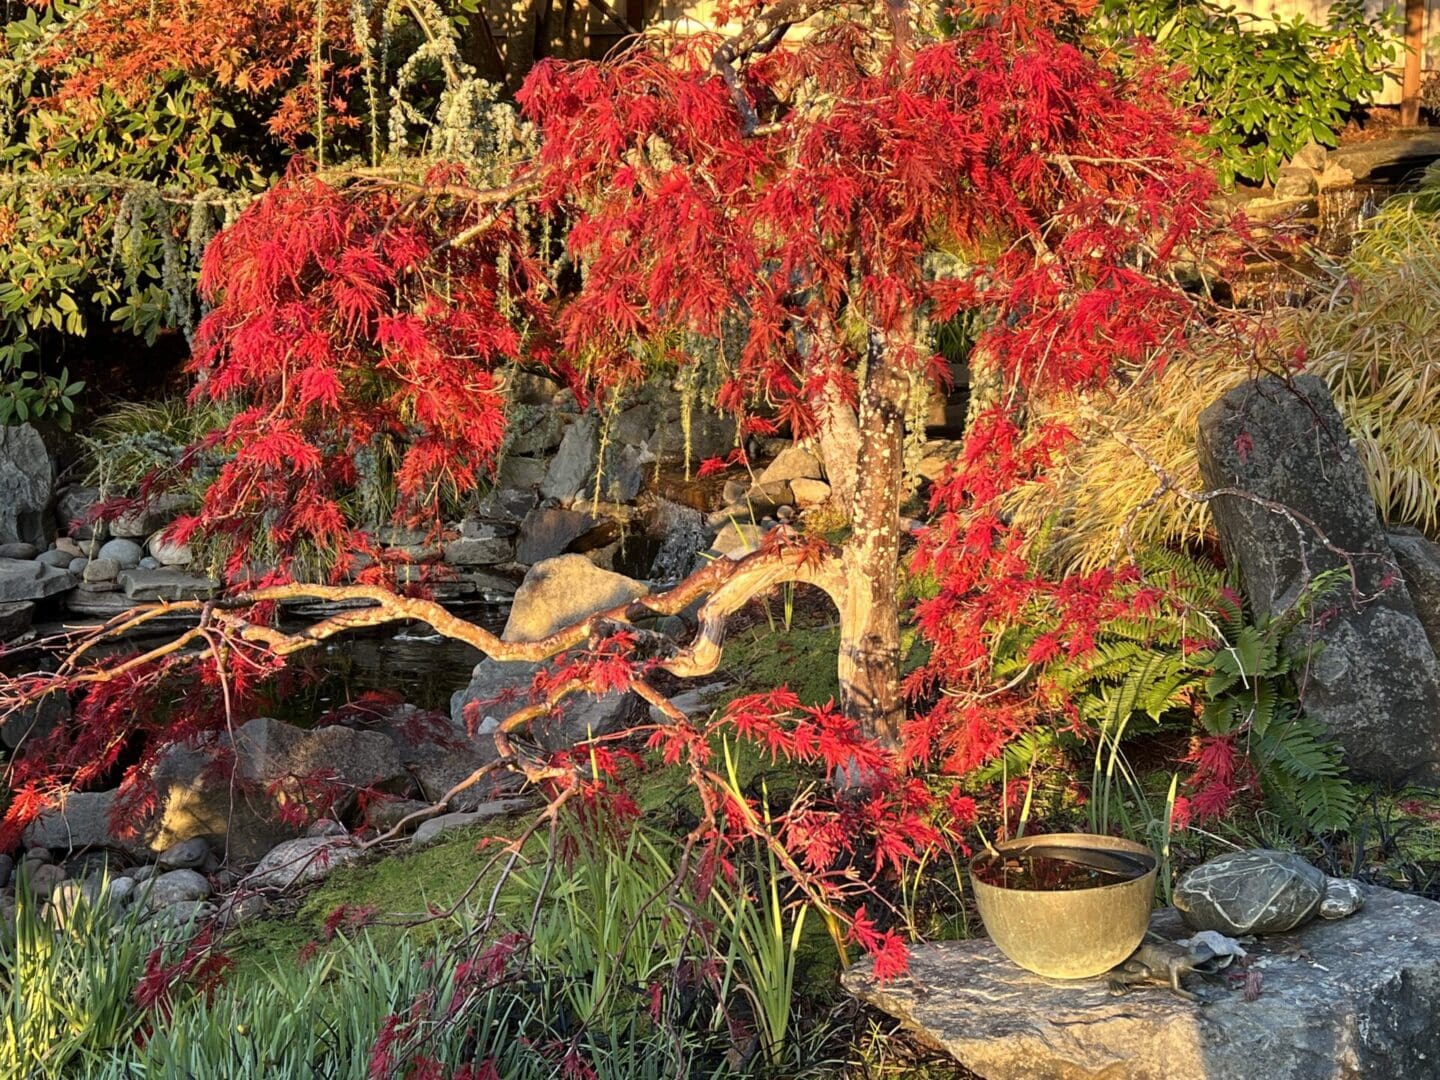 A tree with red leaves in the middle of a garden.